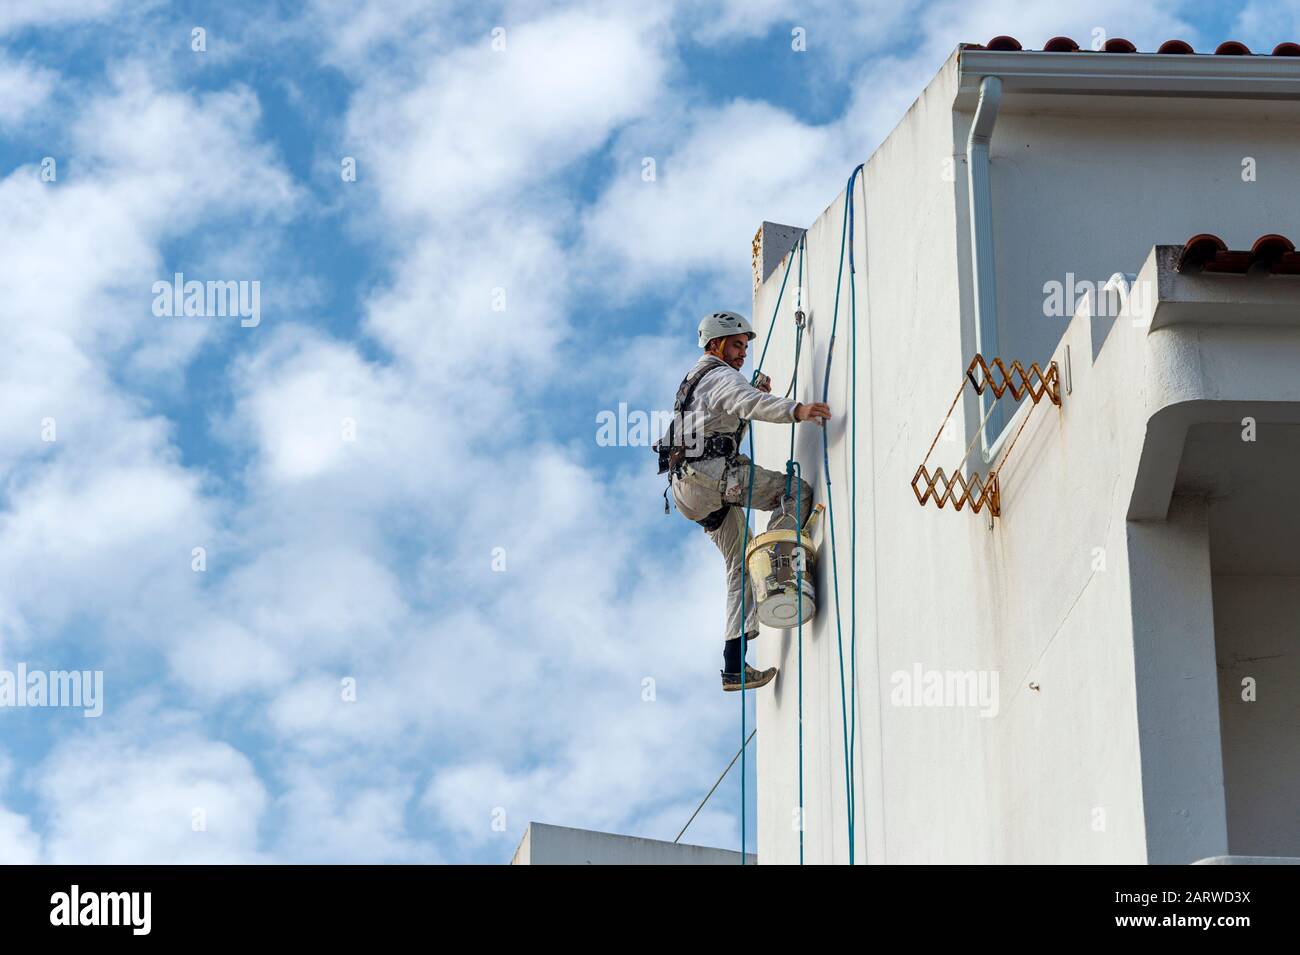 Rope access abseiler, building repairs and painter wearing full safety body harness on the side of a building Stock Photo